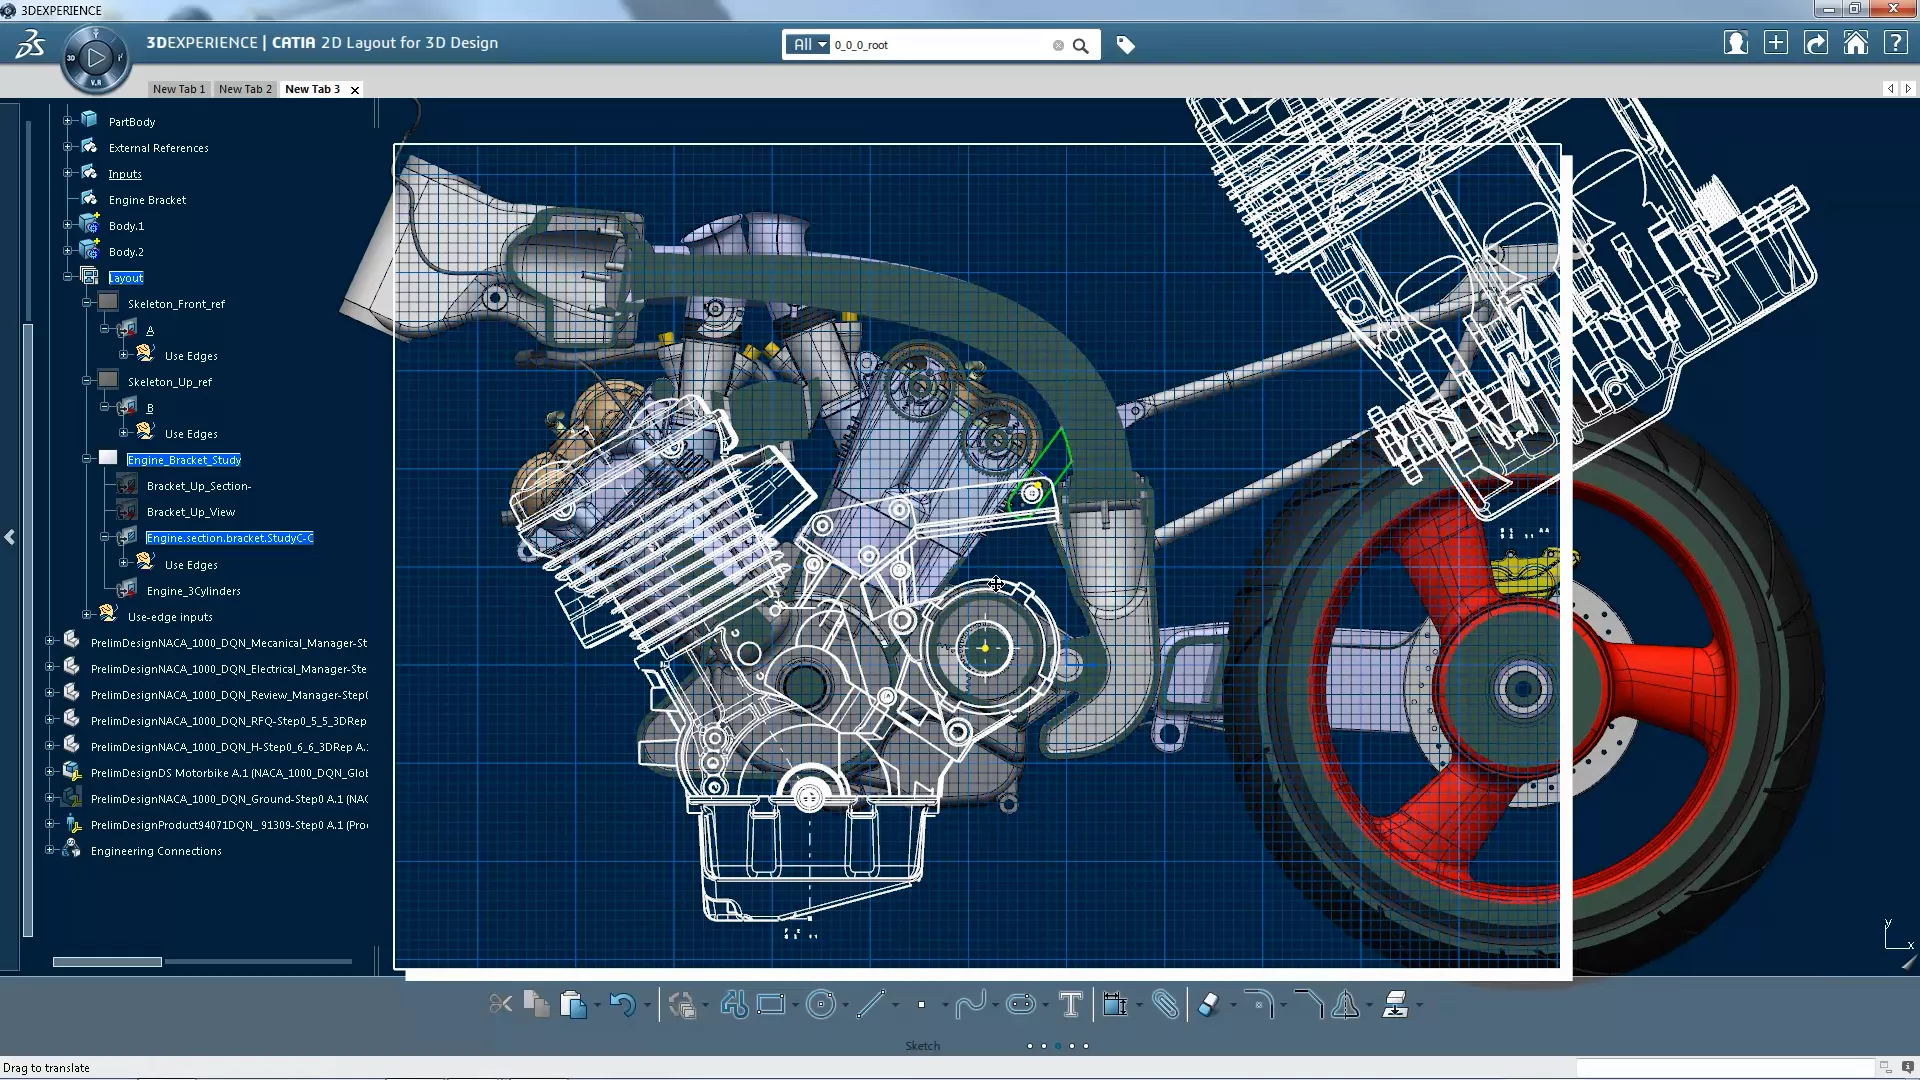 Want to Learn More About CATIA?